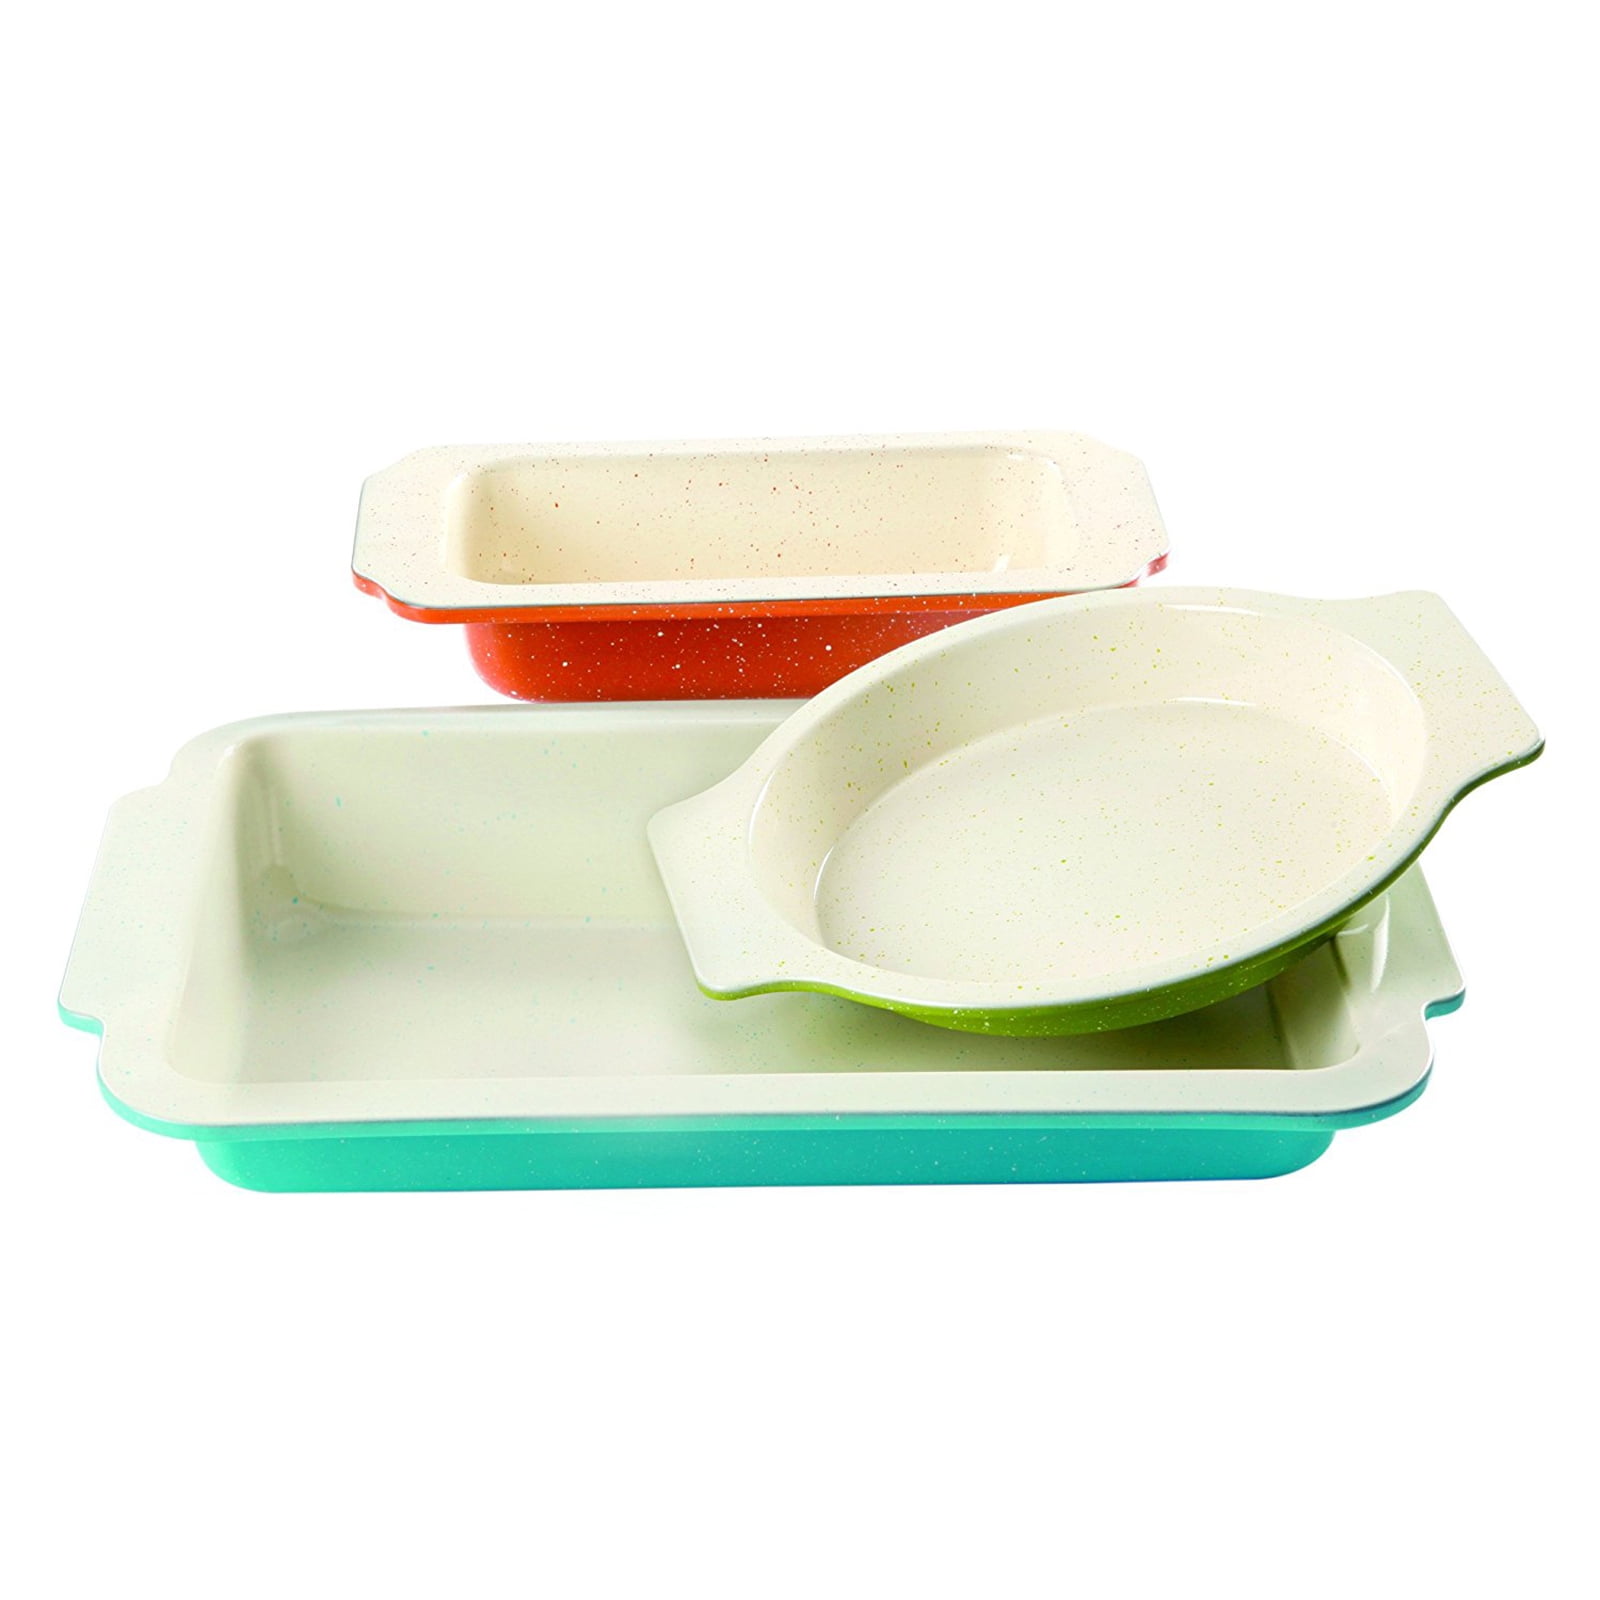 Gibson Home Colorsplash 3 Piece Imbue Bakeware Set in Assorted Colors